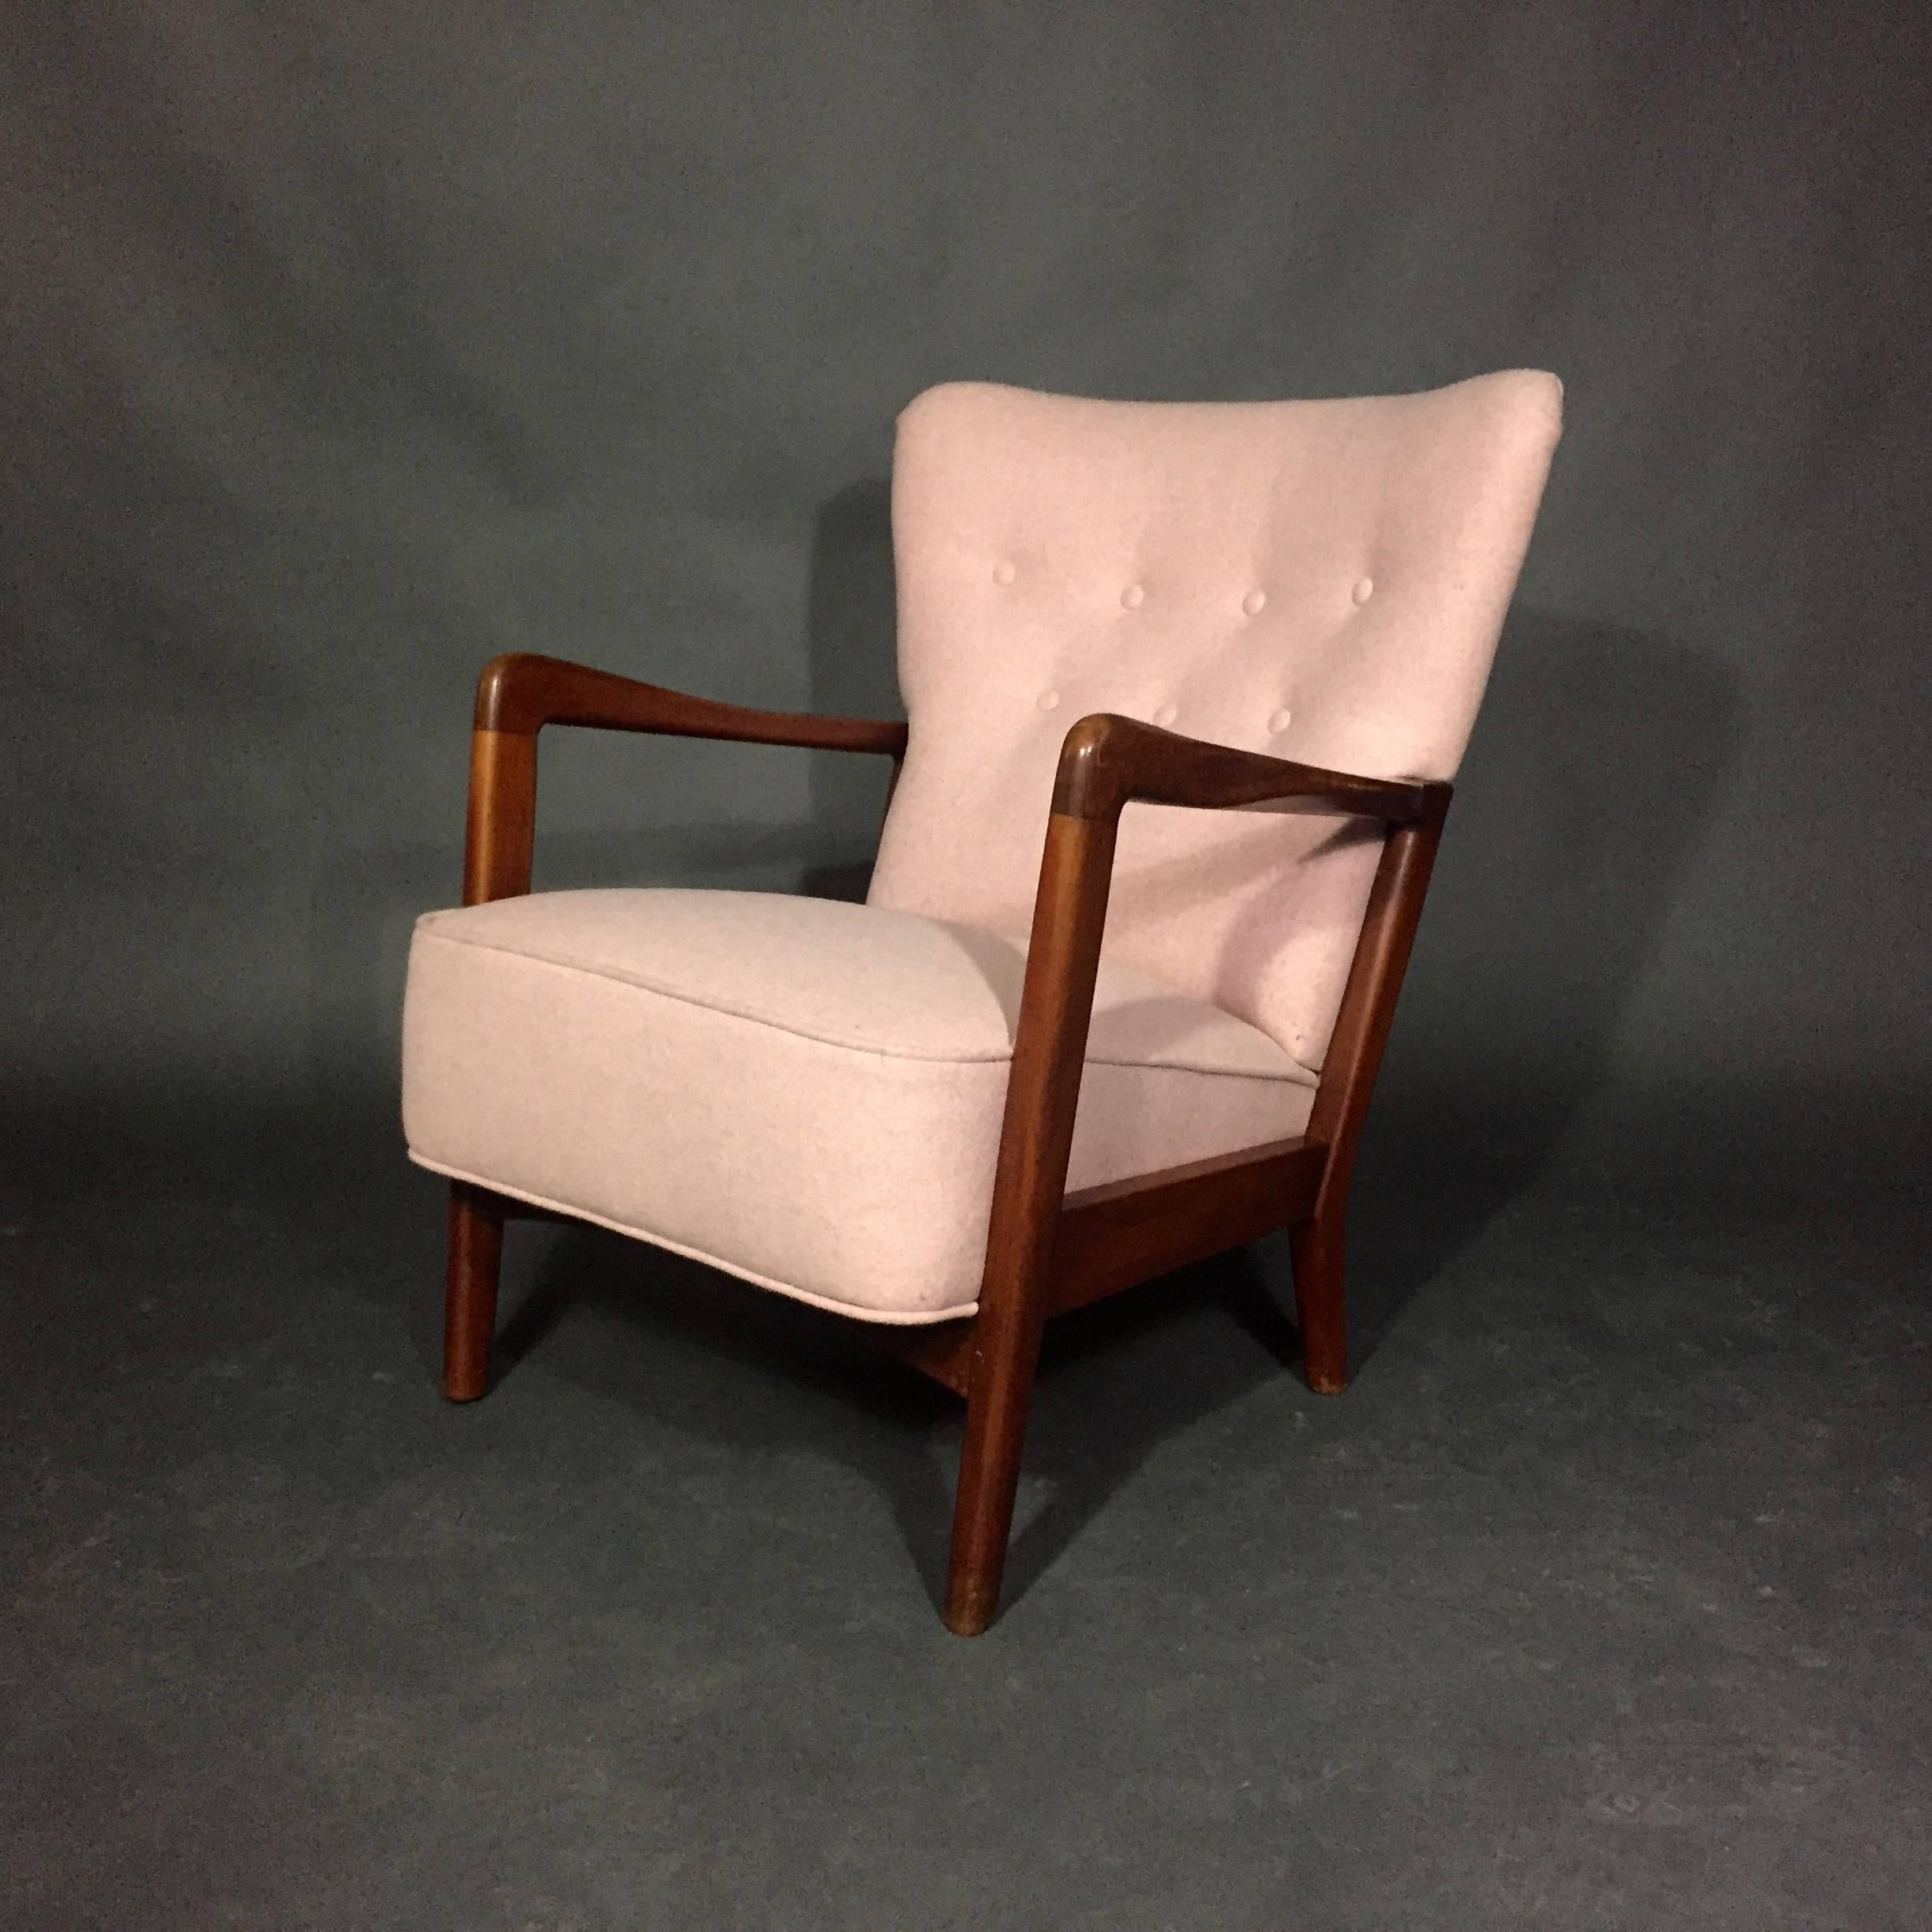 We updated this 1940s armchair designed by Søren Hansen and produced by Fritz Hansen - with the always amazing Kvadrat Divina felted wool fabric in pale pink color 613. Solid beech frame with a very nice vintage patina. Essentially built without